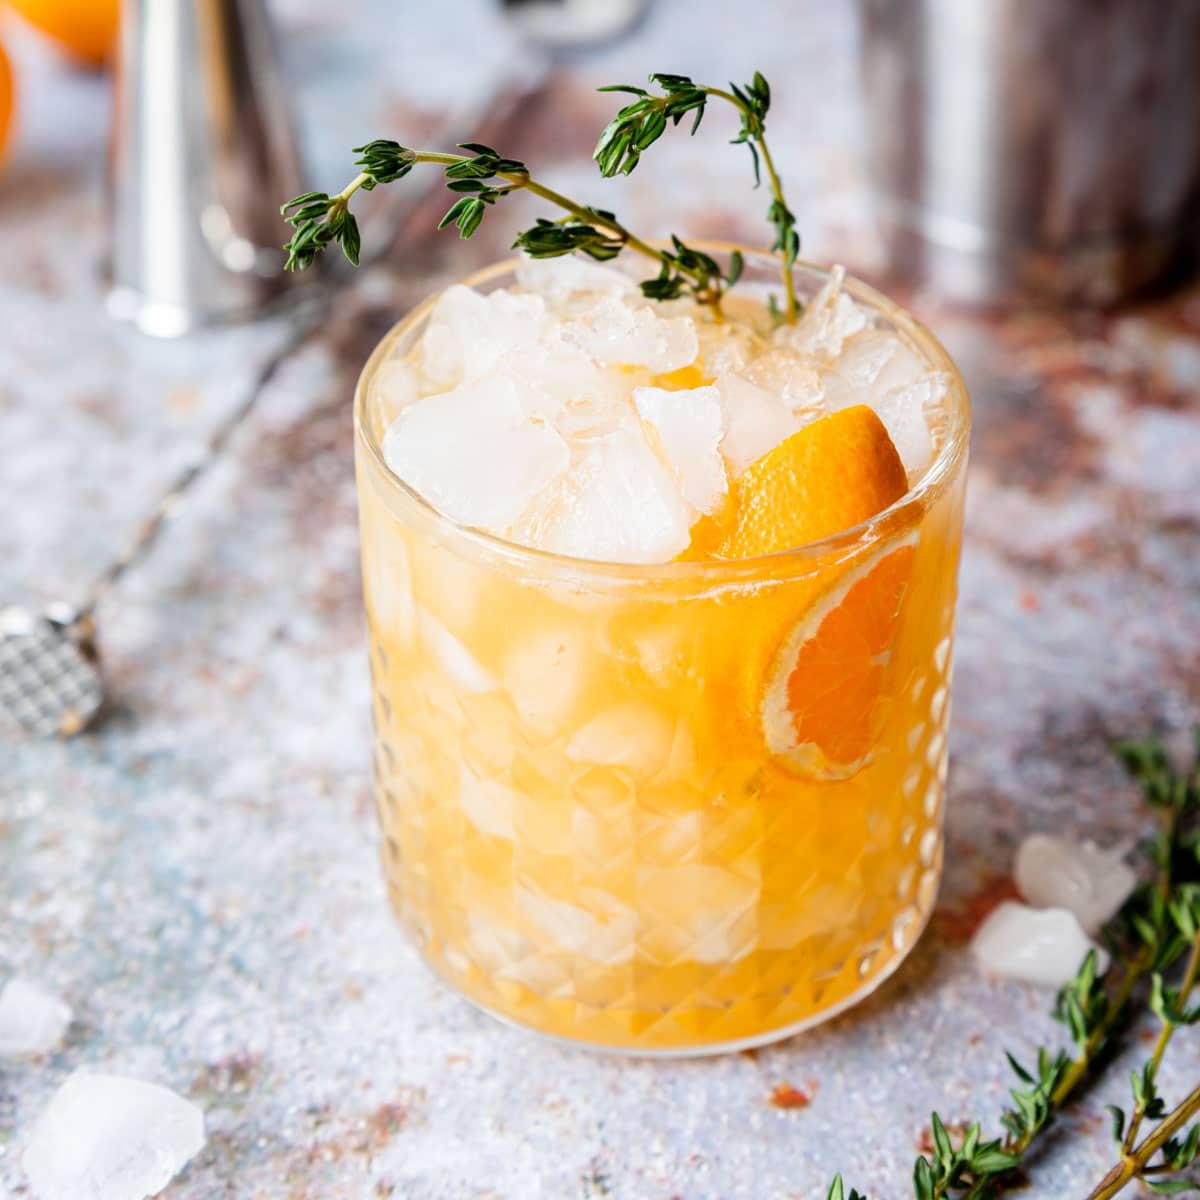 Etched glass filled with an orange smash cocktail garnished with fresh thyme